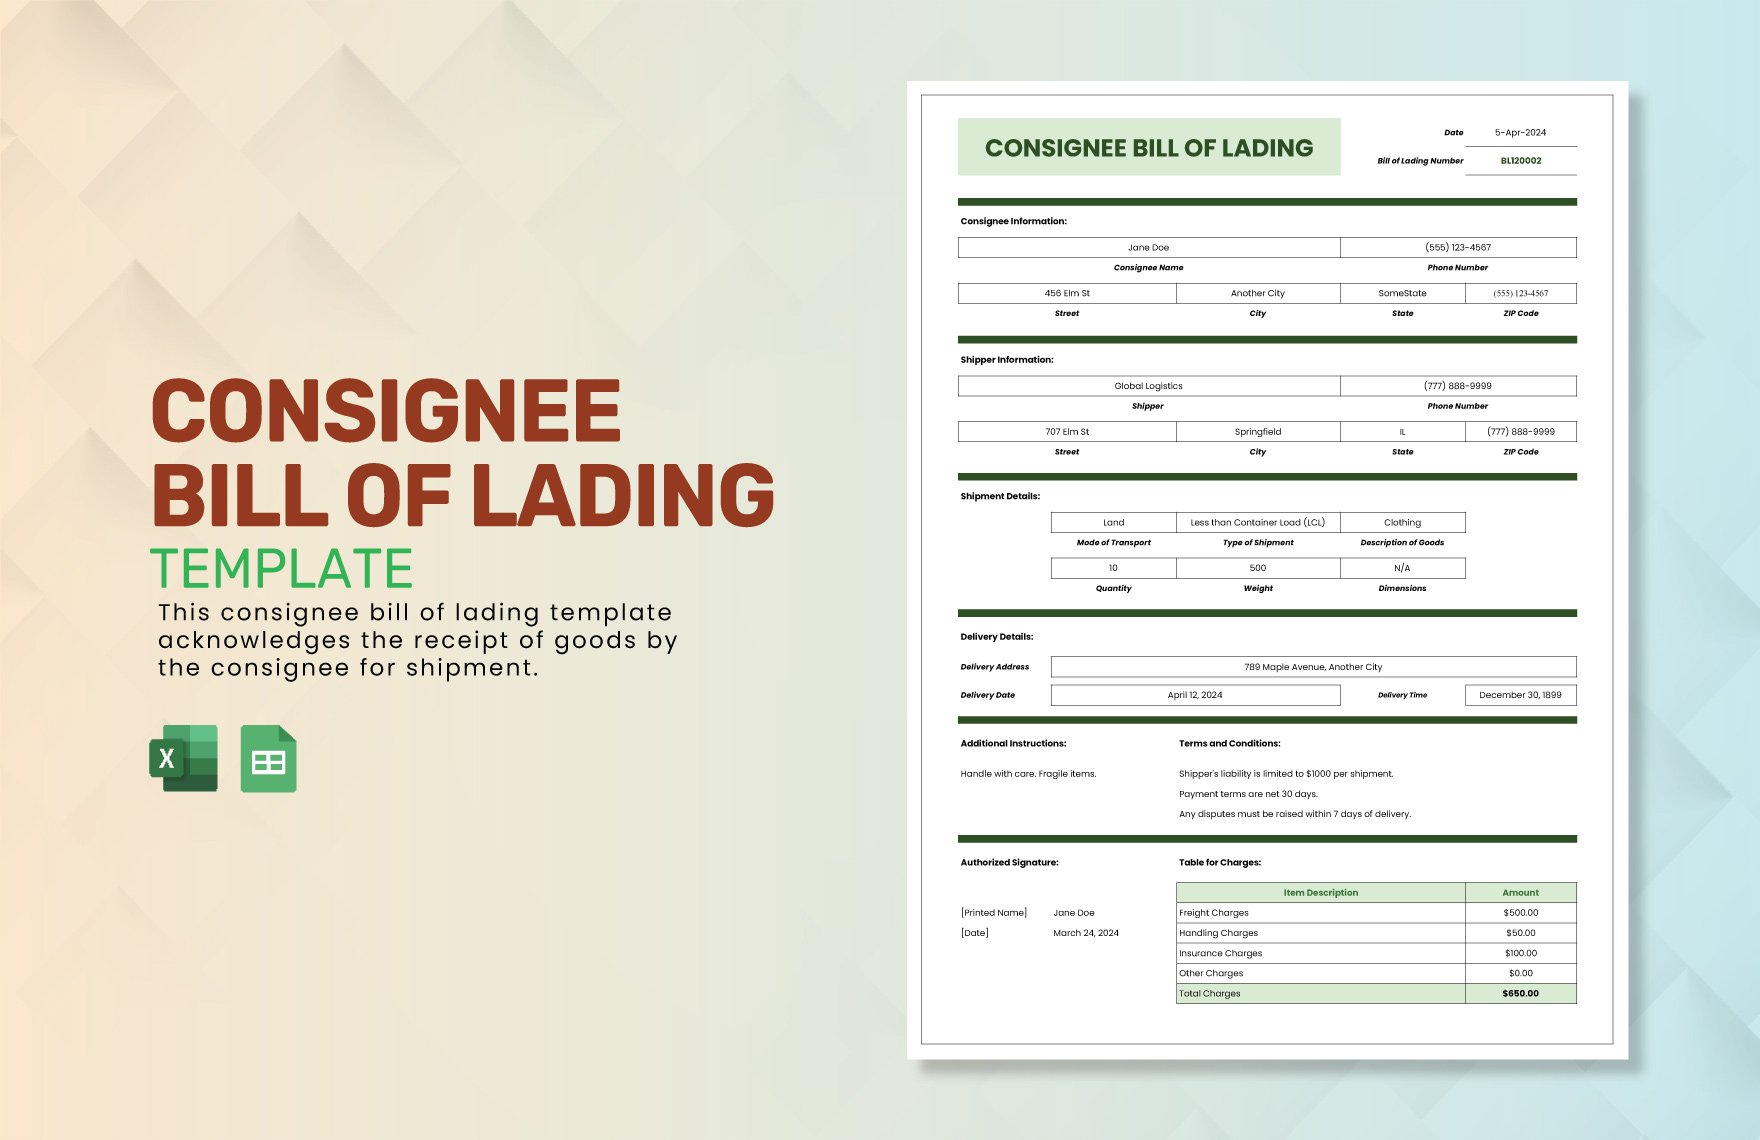 Consignee Bill of Lading Template in Excel, Google Sheets